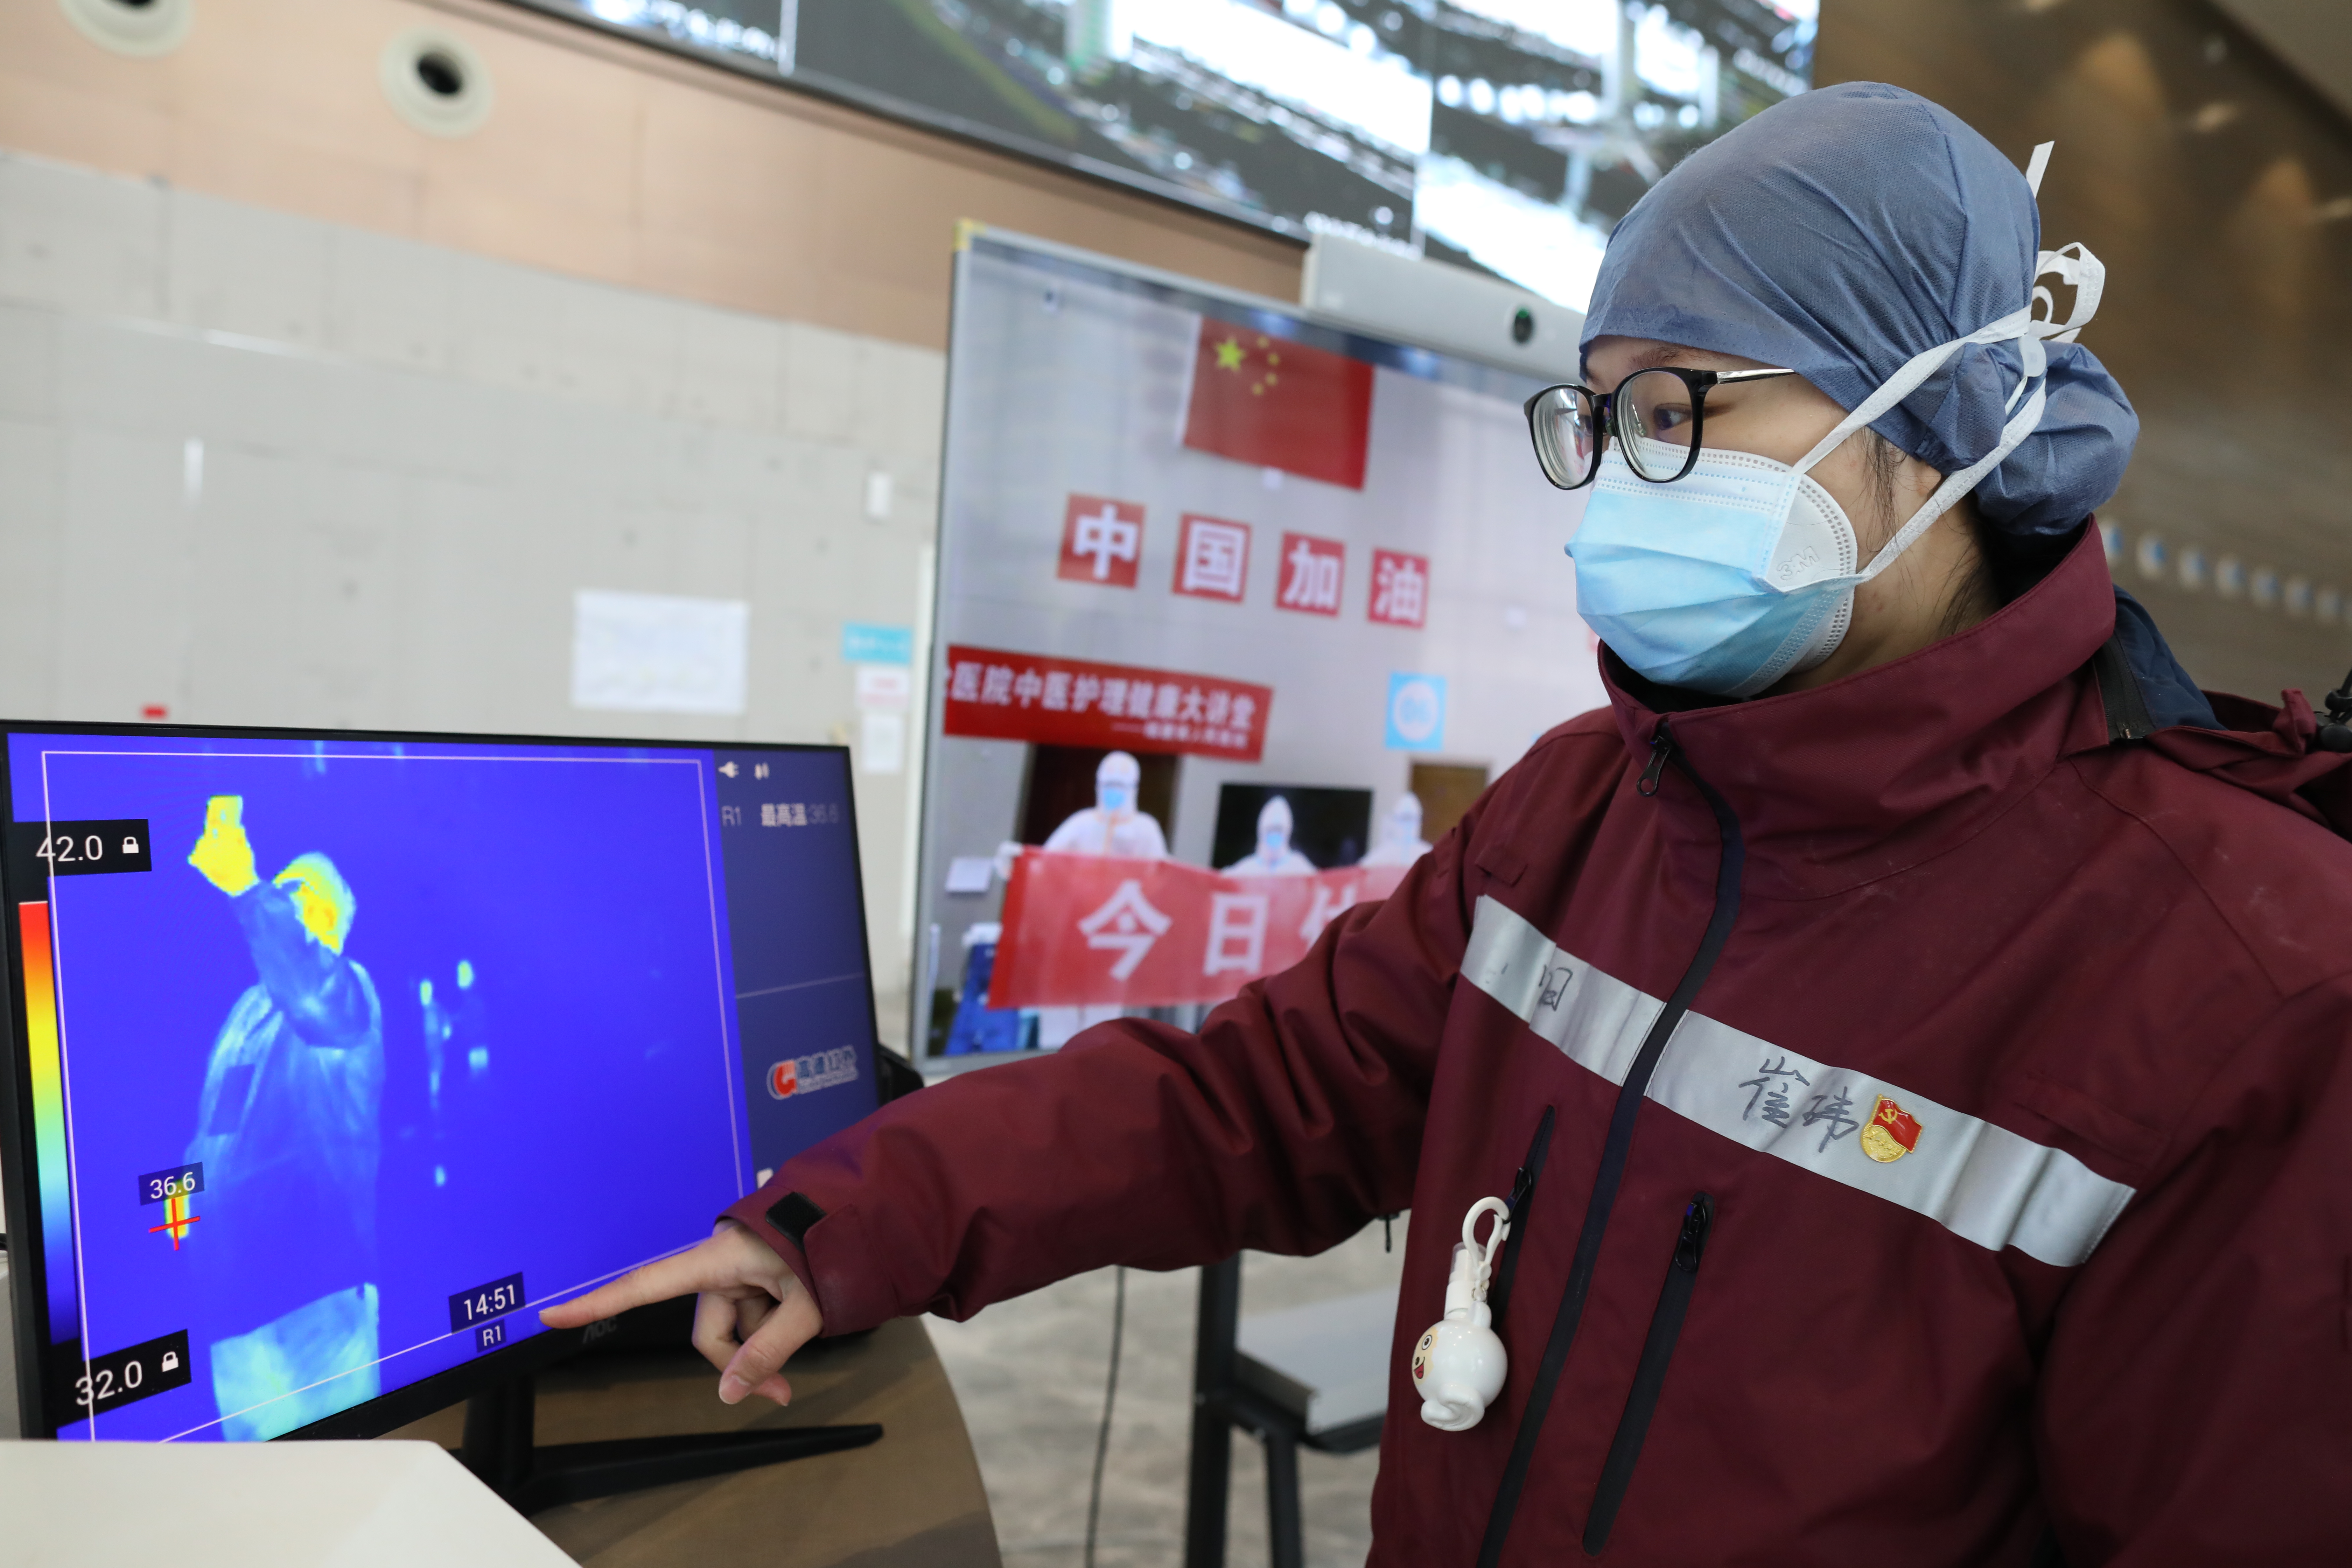 Cui works at a makeshift hospital in Wuhan on March 6. ZHU XINGXIN/CHINA DAILY